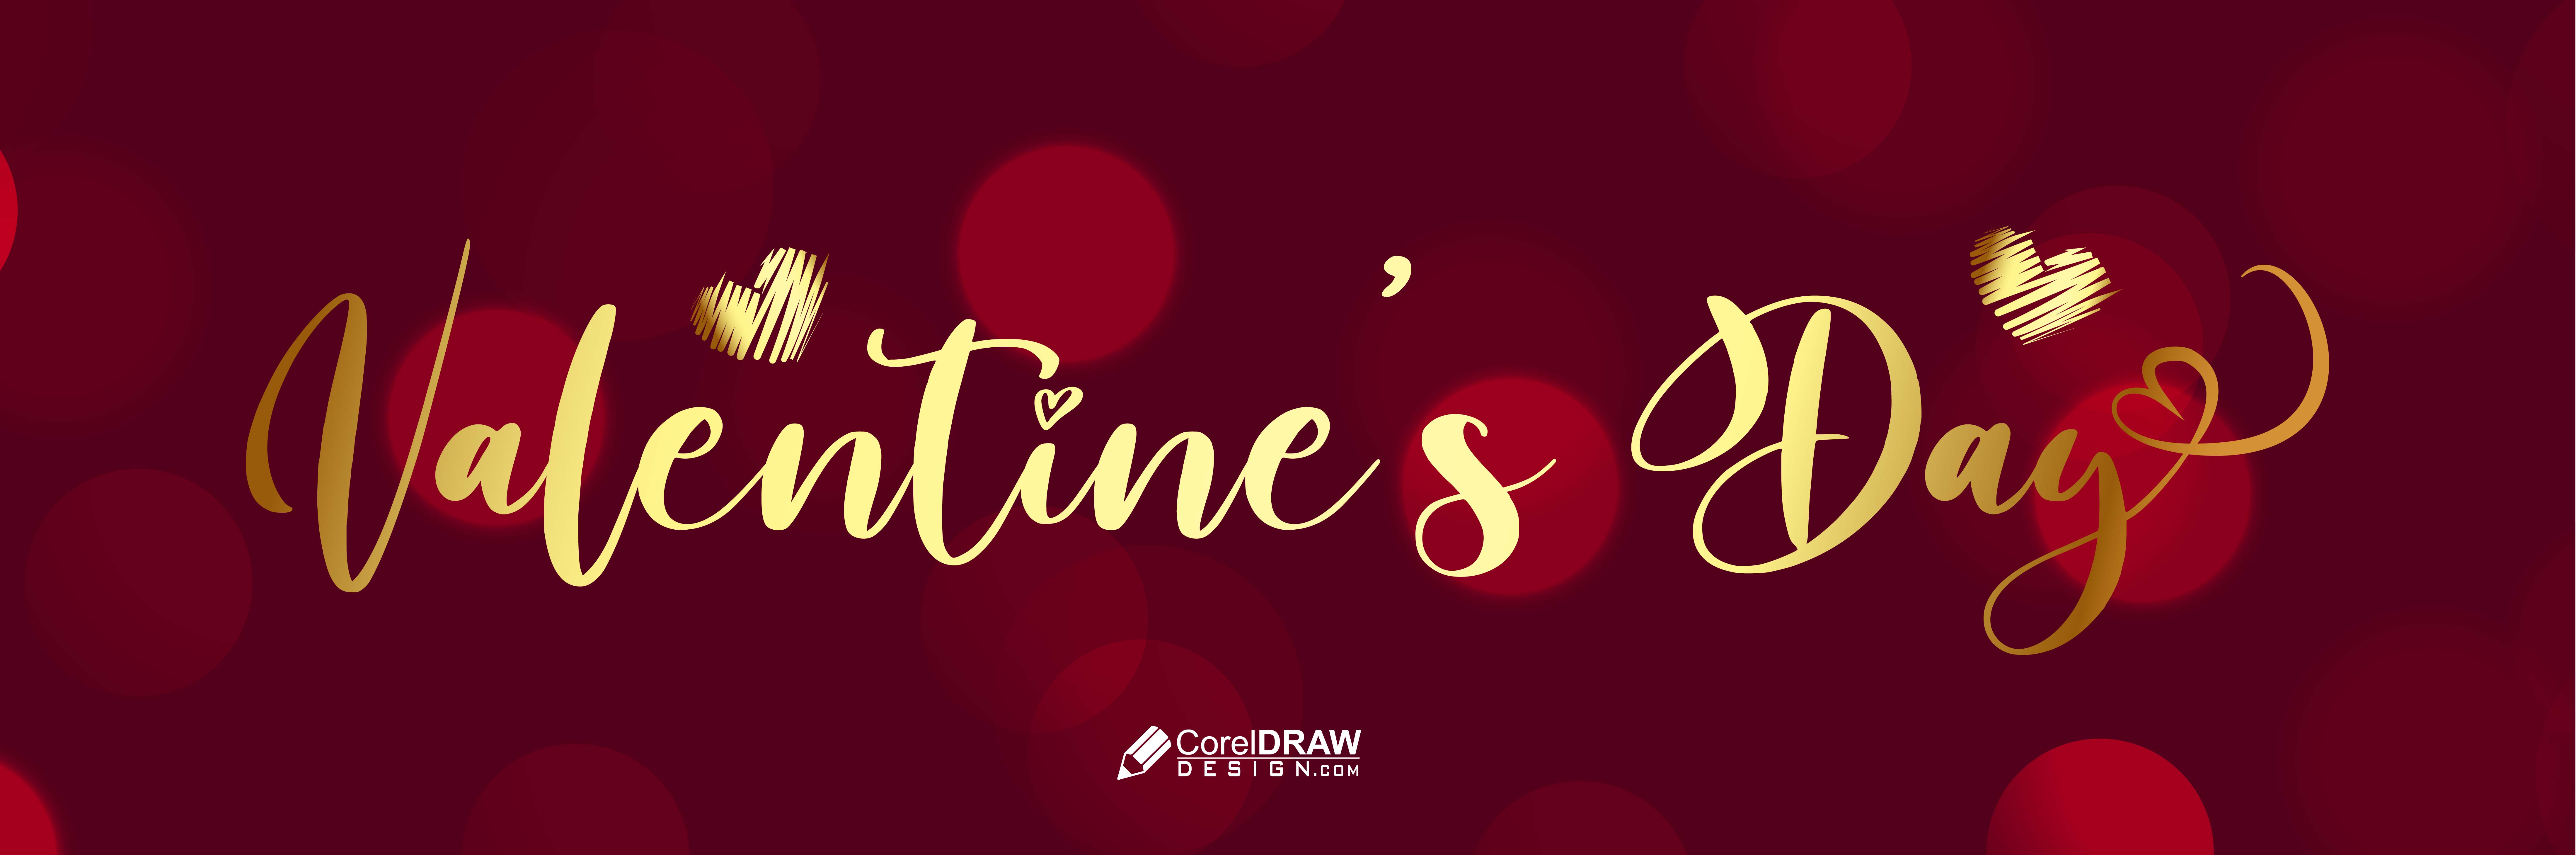 Romantic Valentines Day Lettering Vector Template